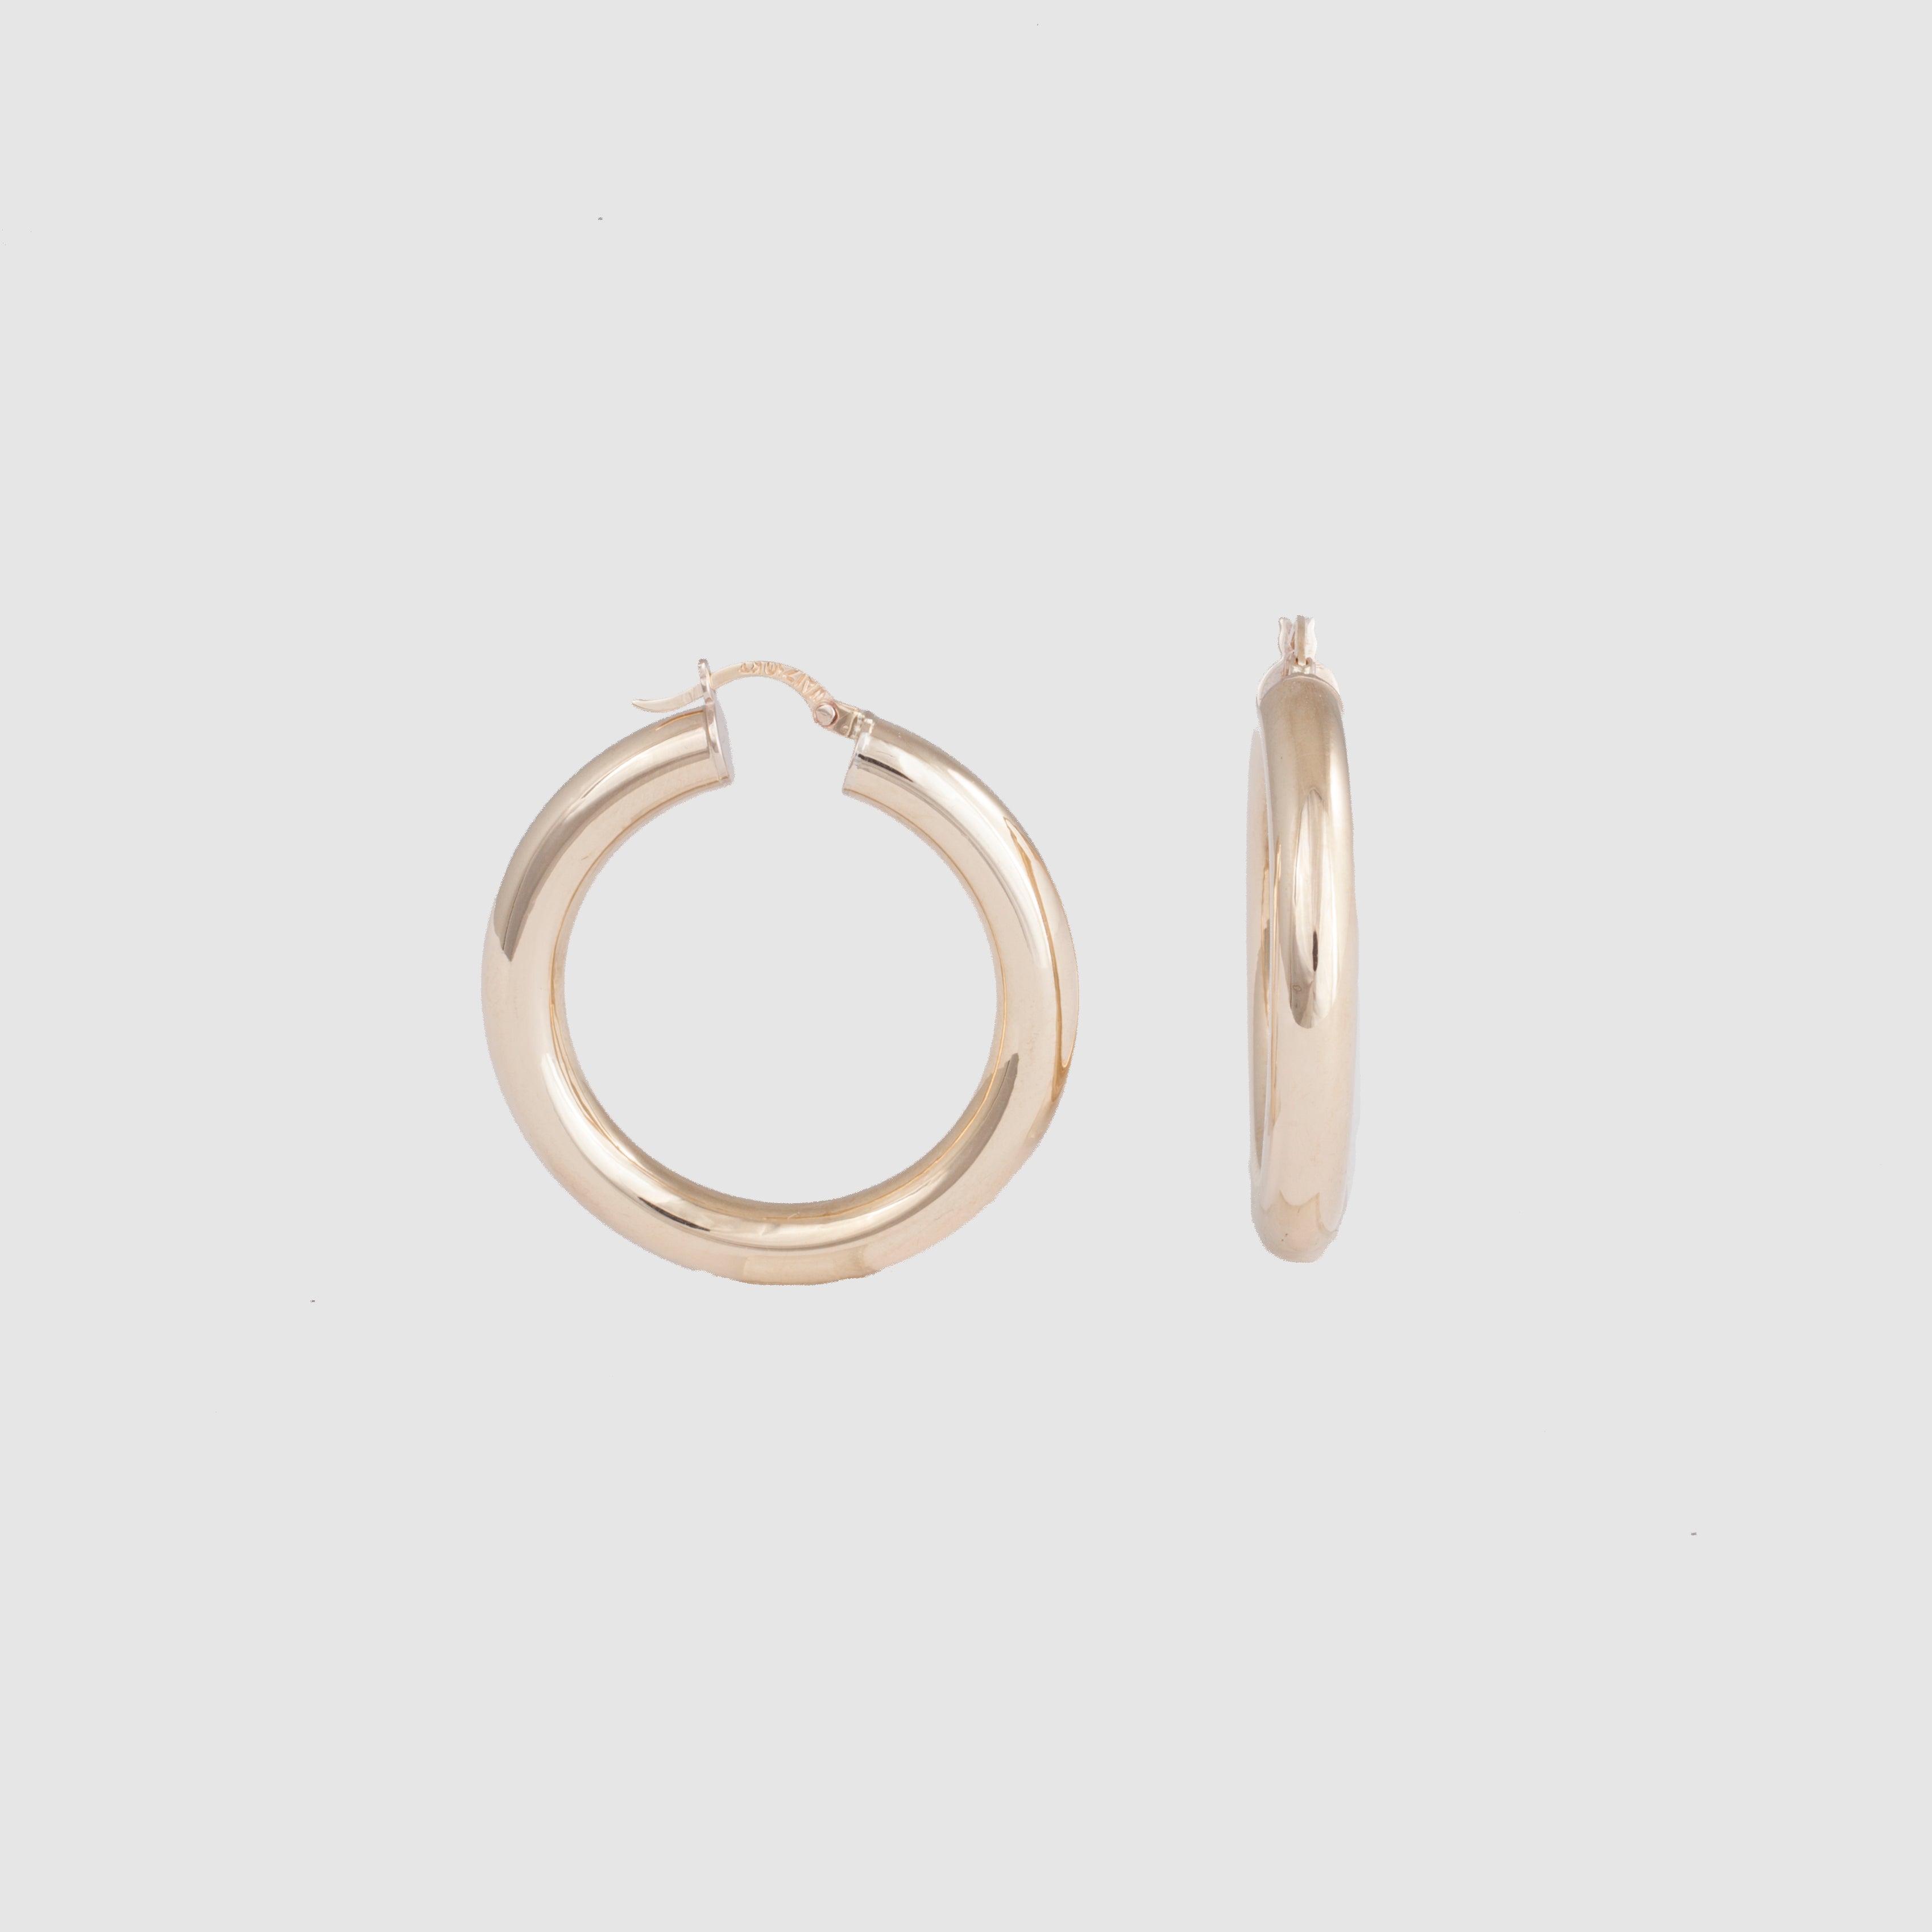 Extra large thick 10k solid yellow gold hoop earrings